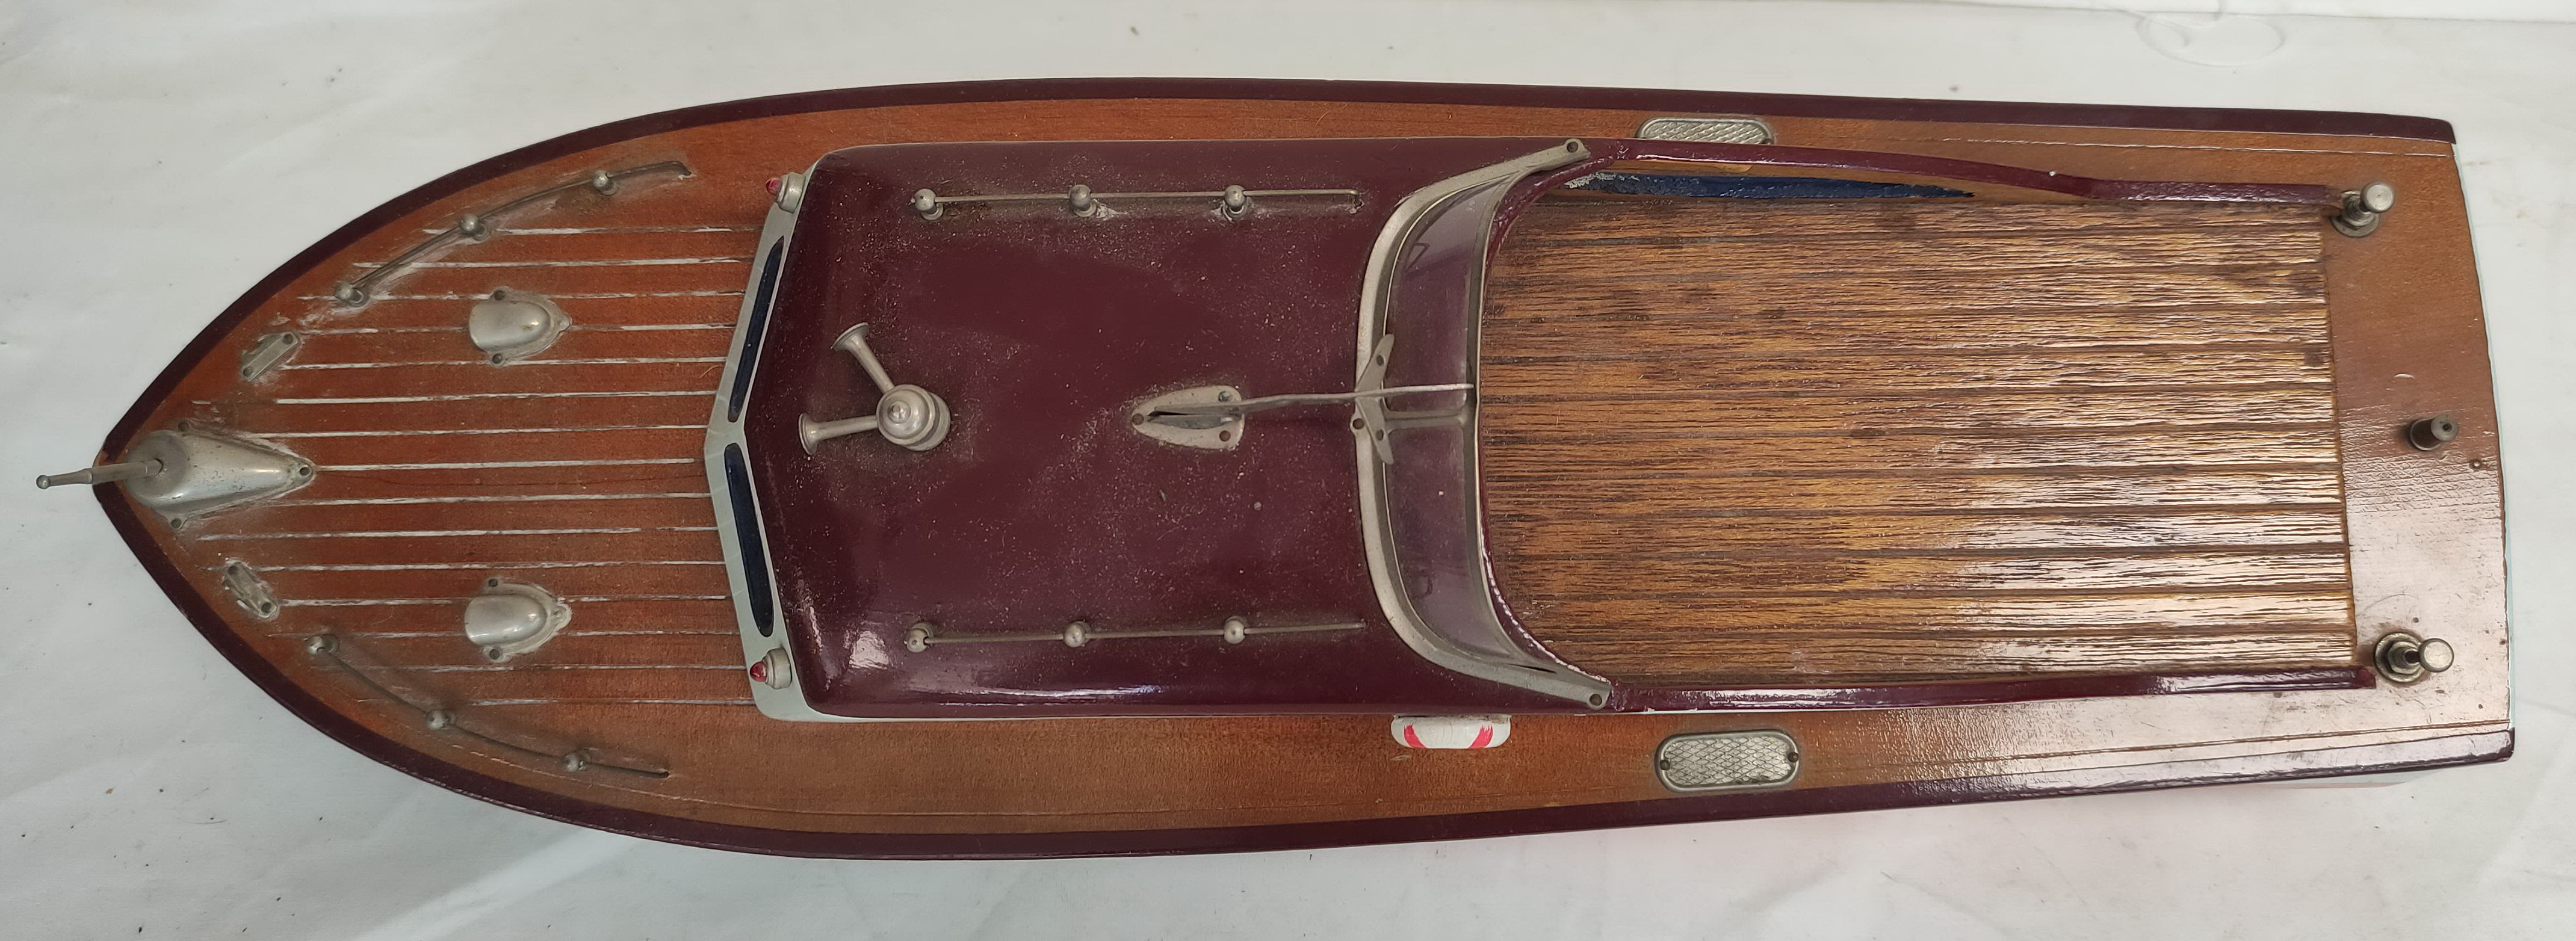 Vintage wooden painted model boat with electric motor. - Image 3 of 6